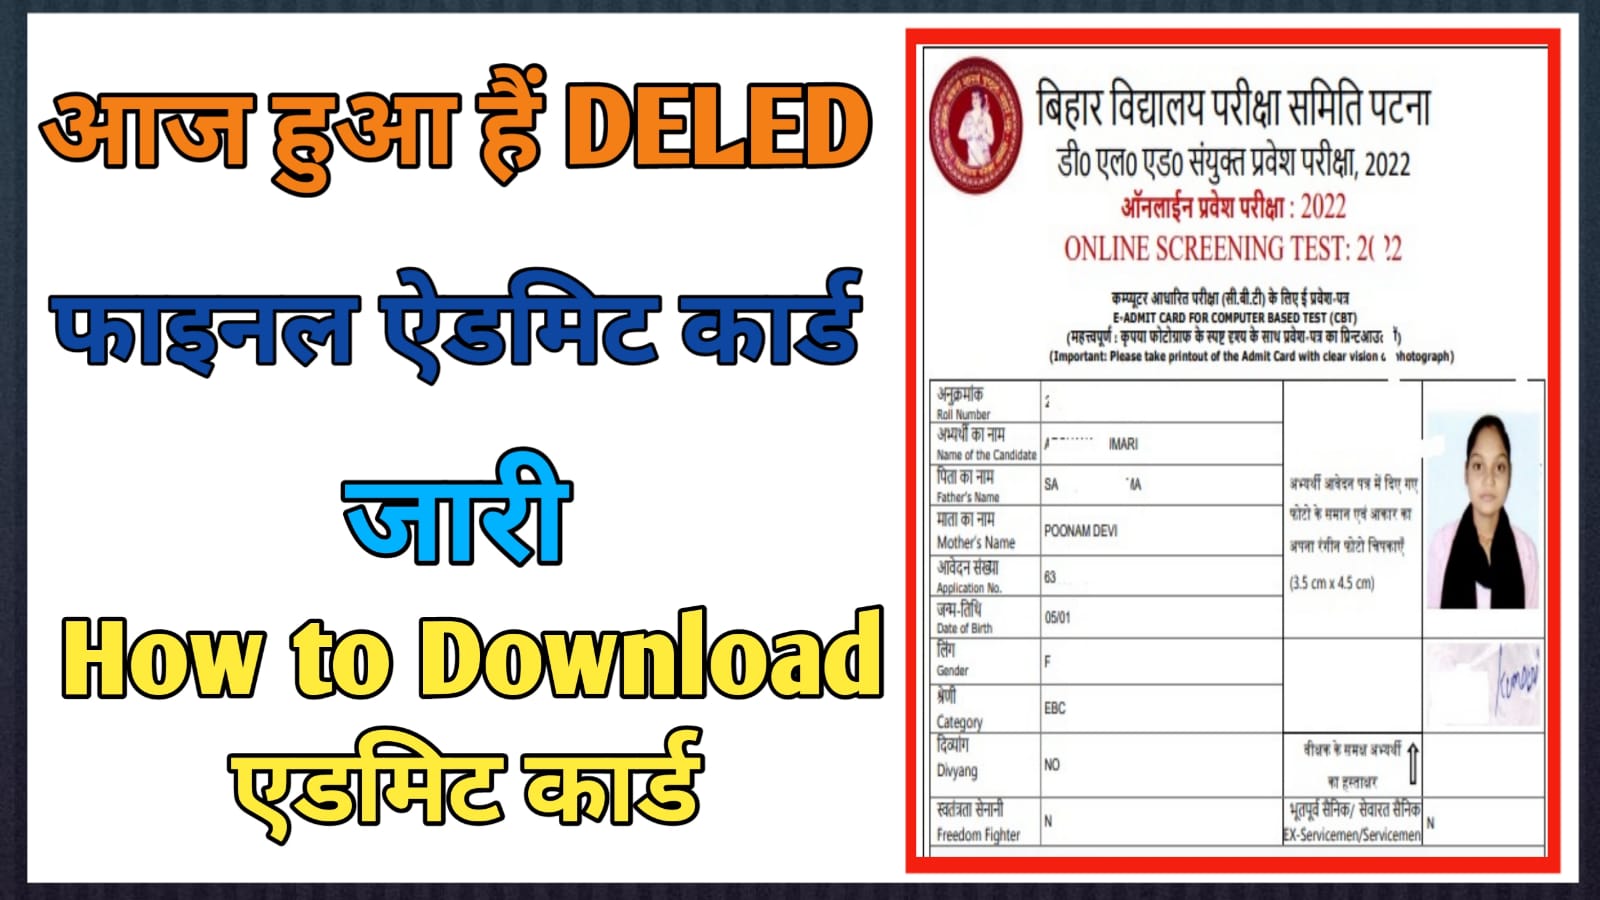 BIHAR DELED FINAL ADMIT CARD OUT 2024